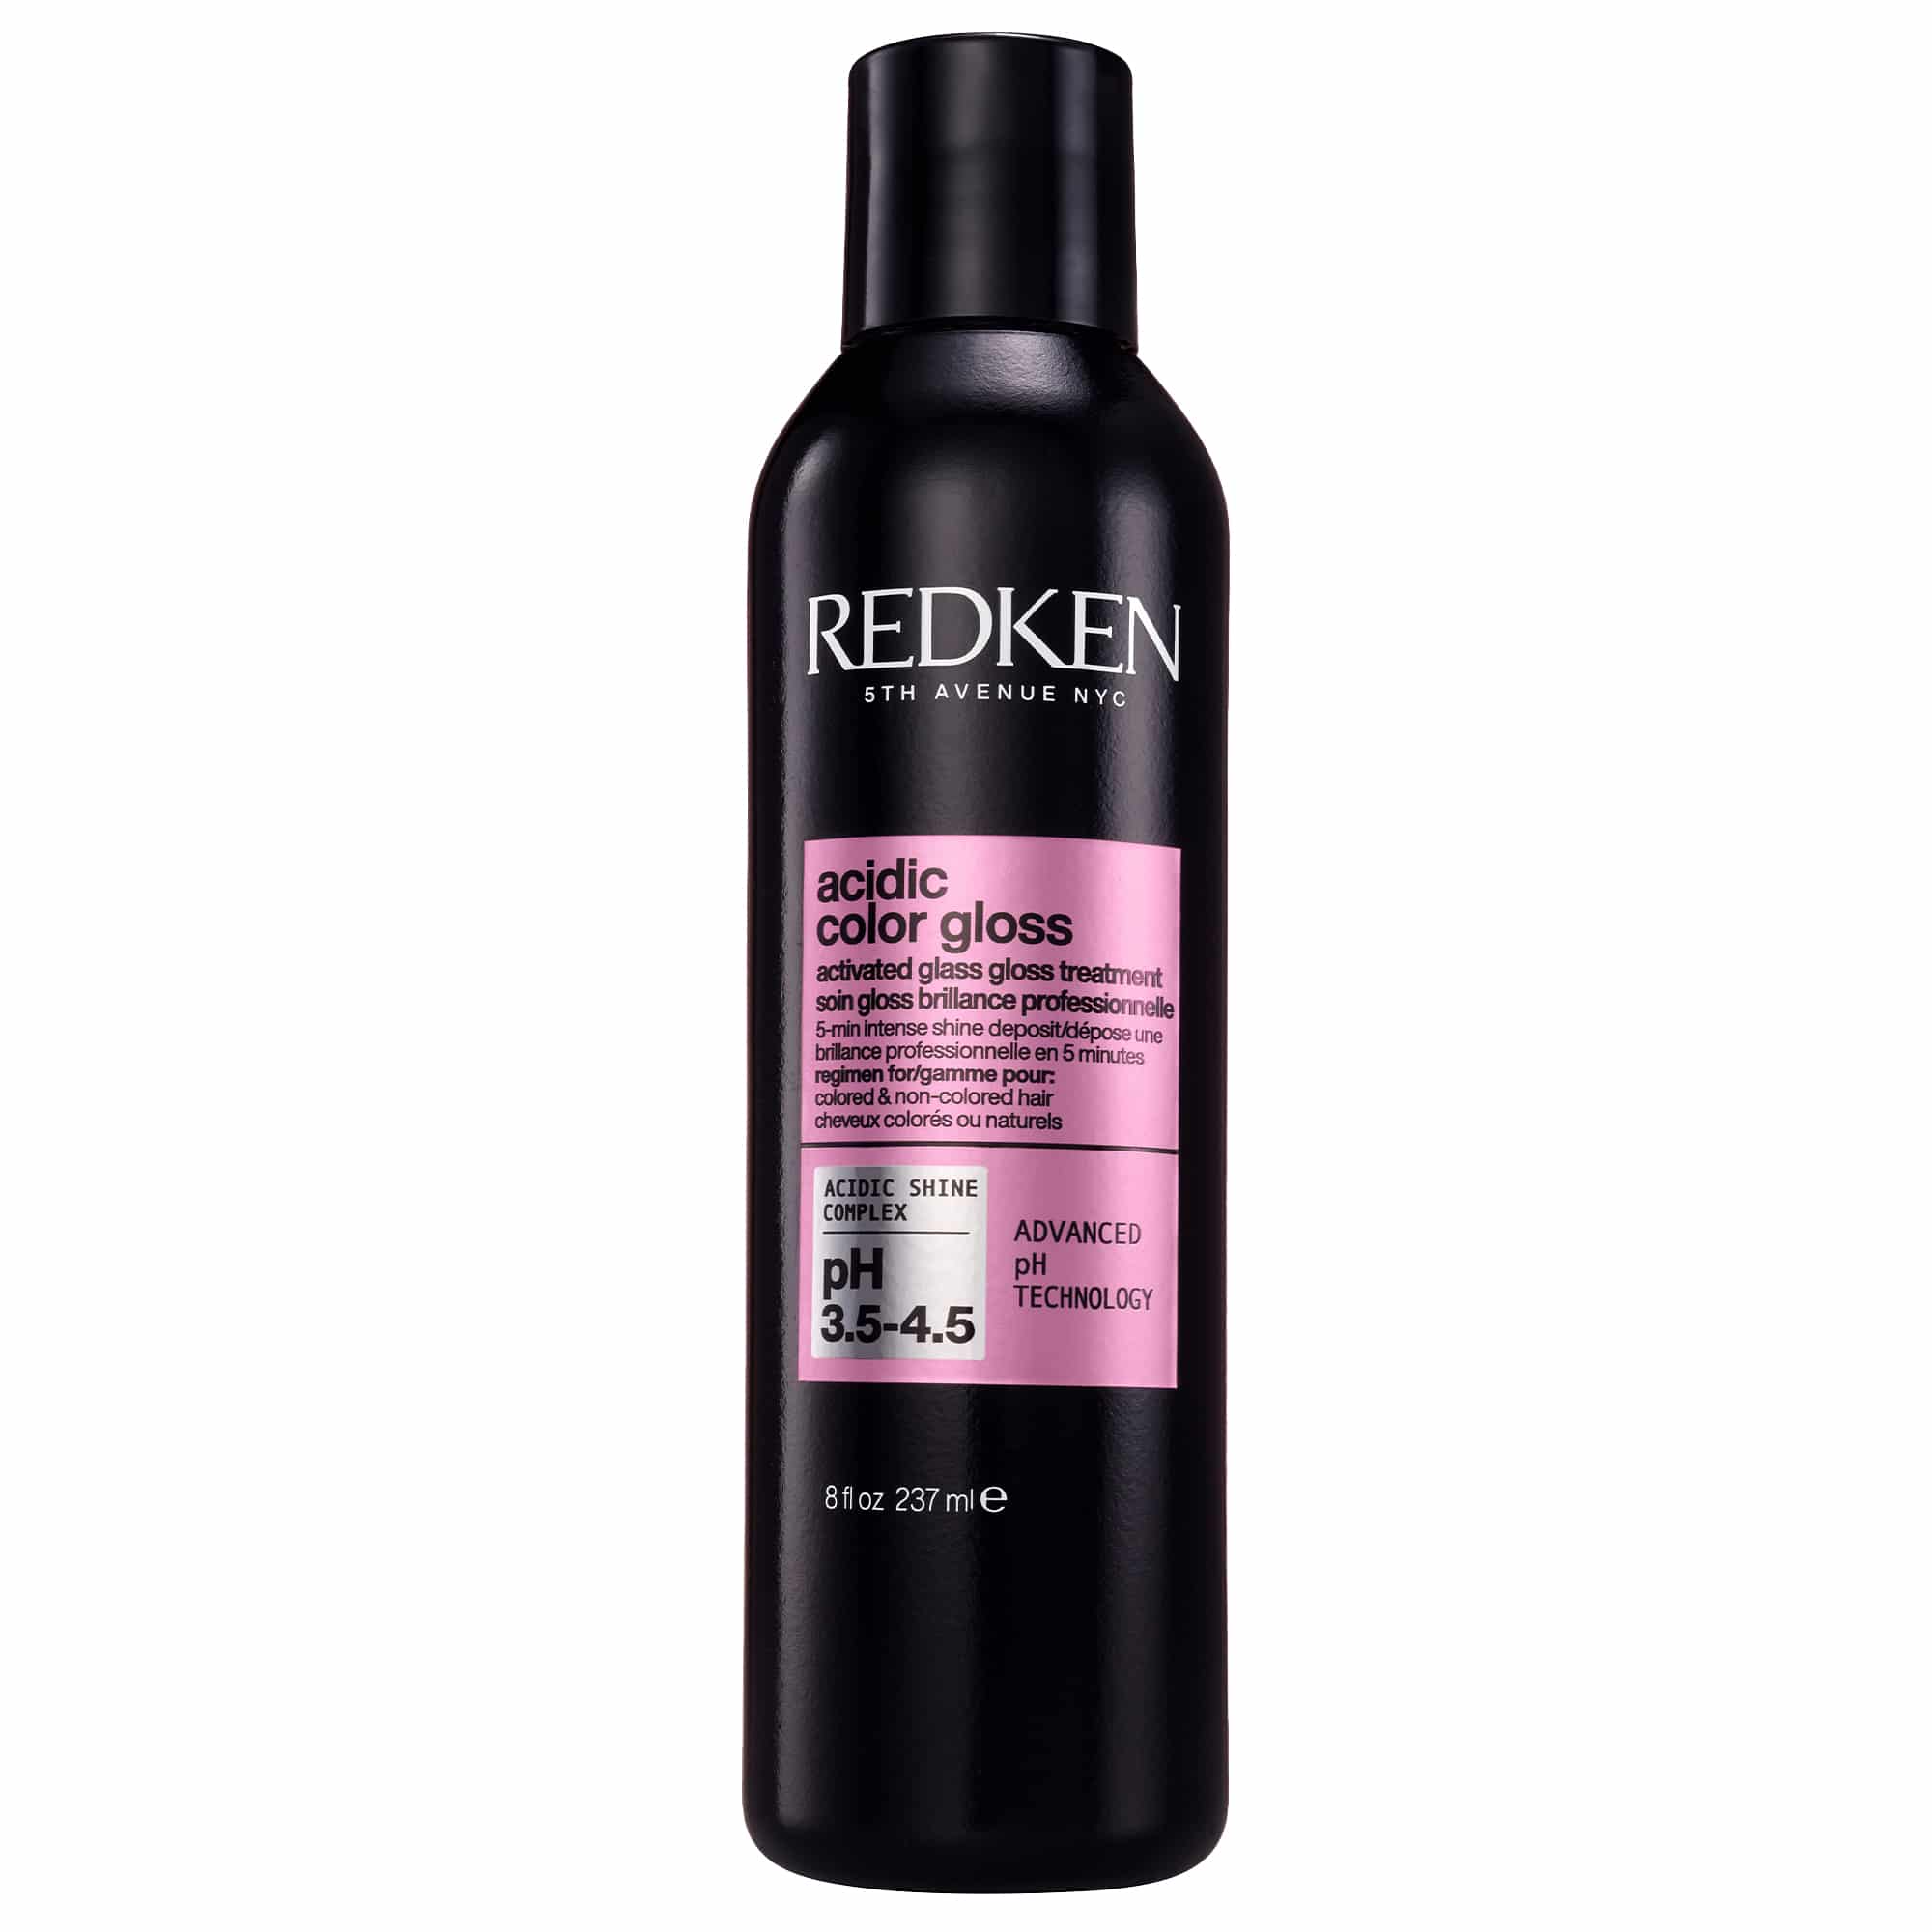 Redken - Acidic Color Gloss Activated Glass Gloss Treatment 237ml